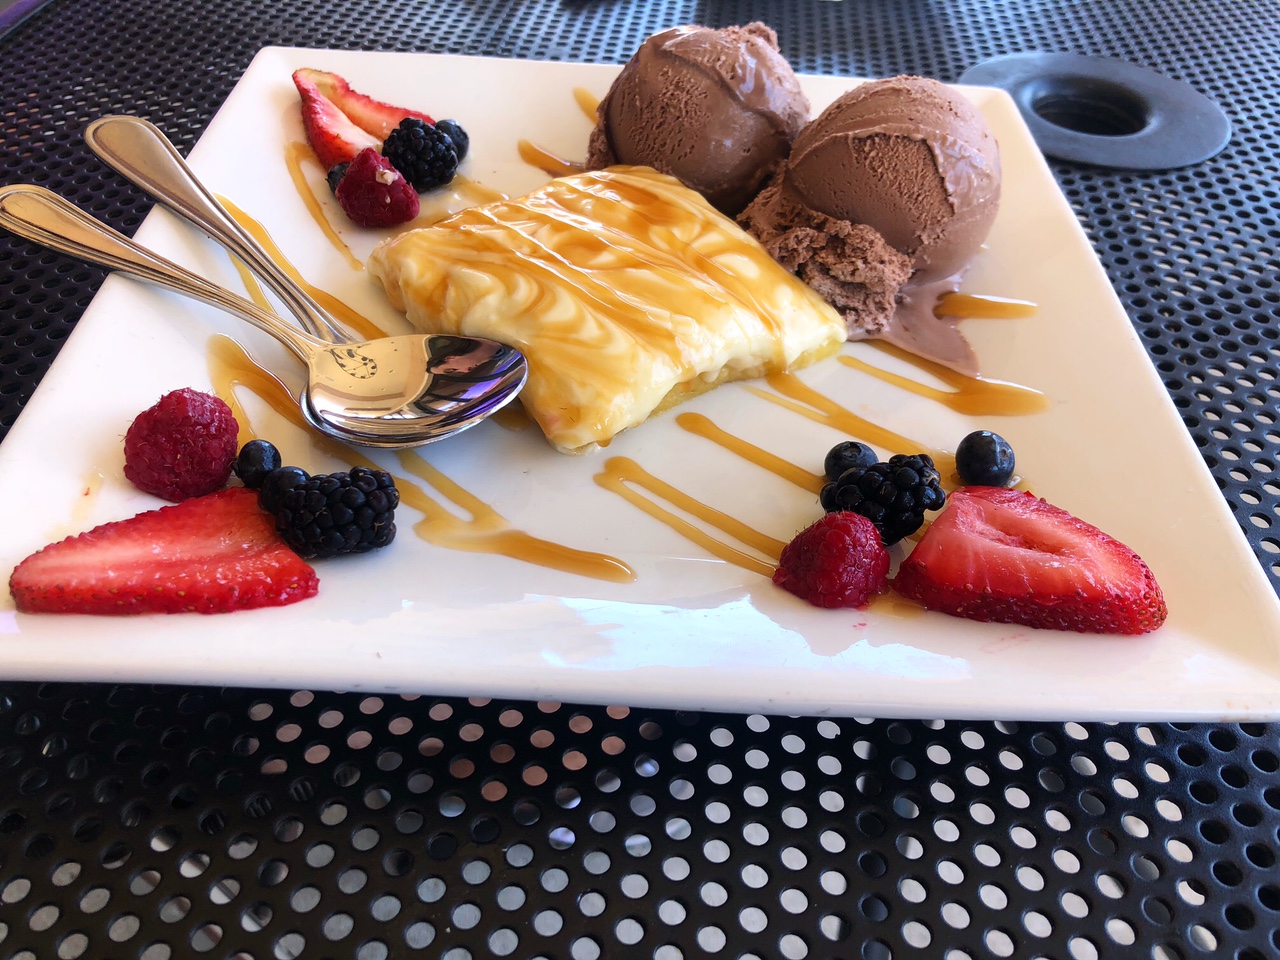 On a black metal outdoor table, there is a white square plate with a yellow gooey butter cake garnished with fresh berries and two scoops of chocolate ice cream. Photo by Alyssa Buckley.